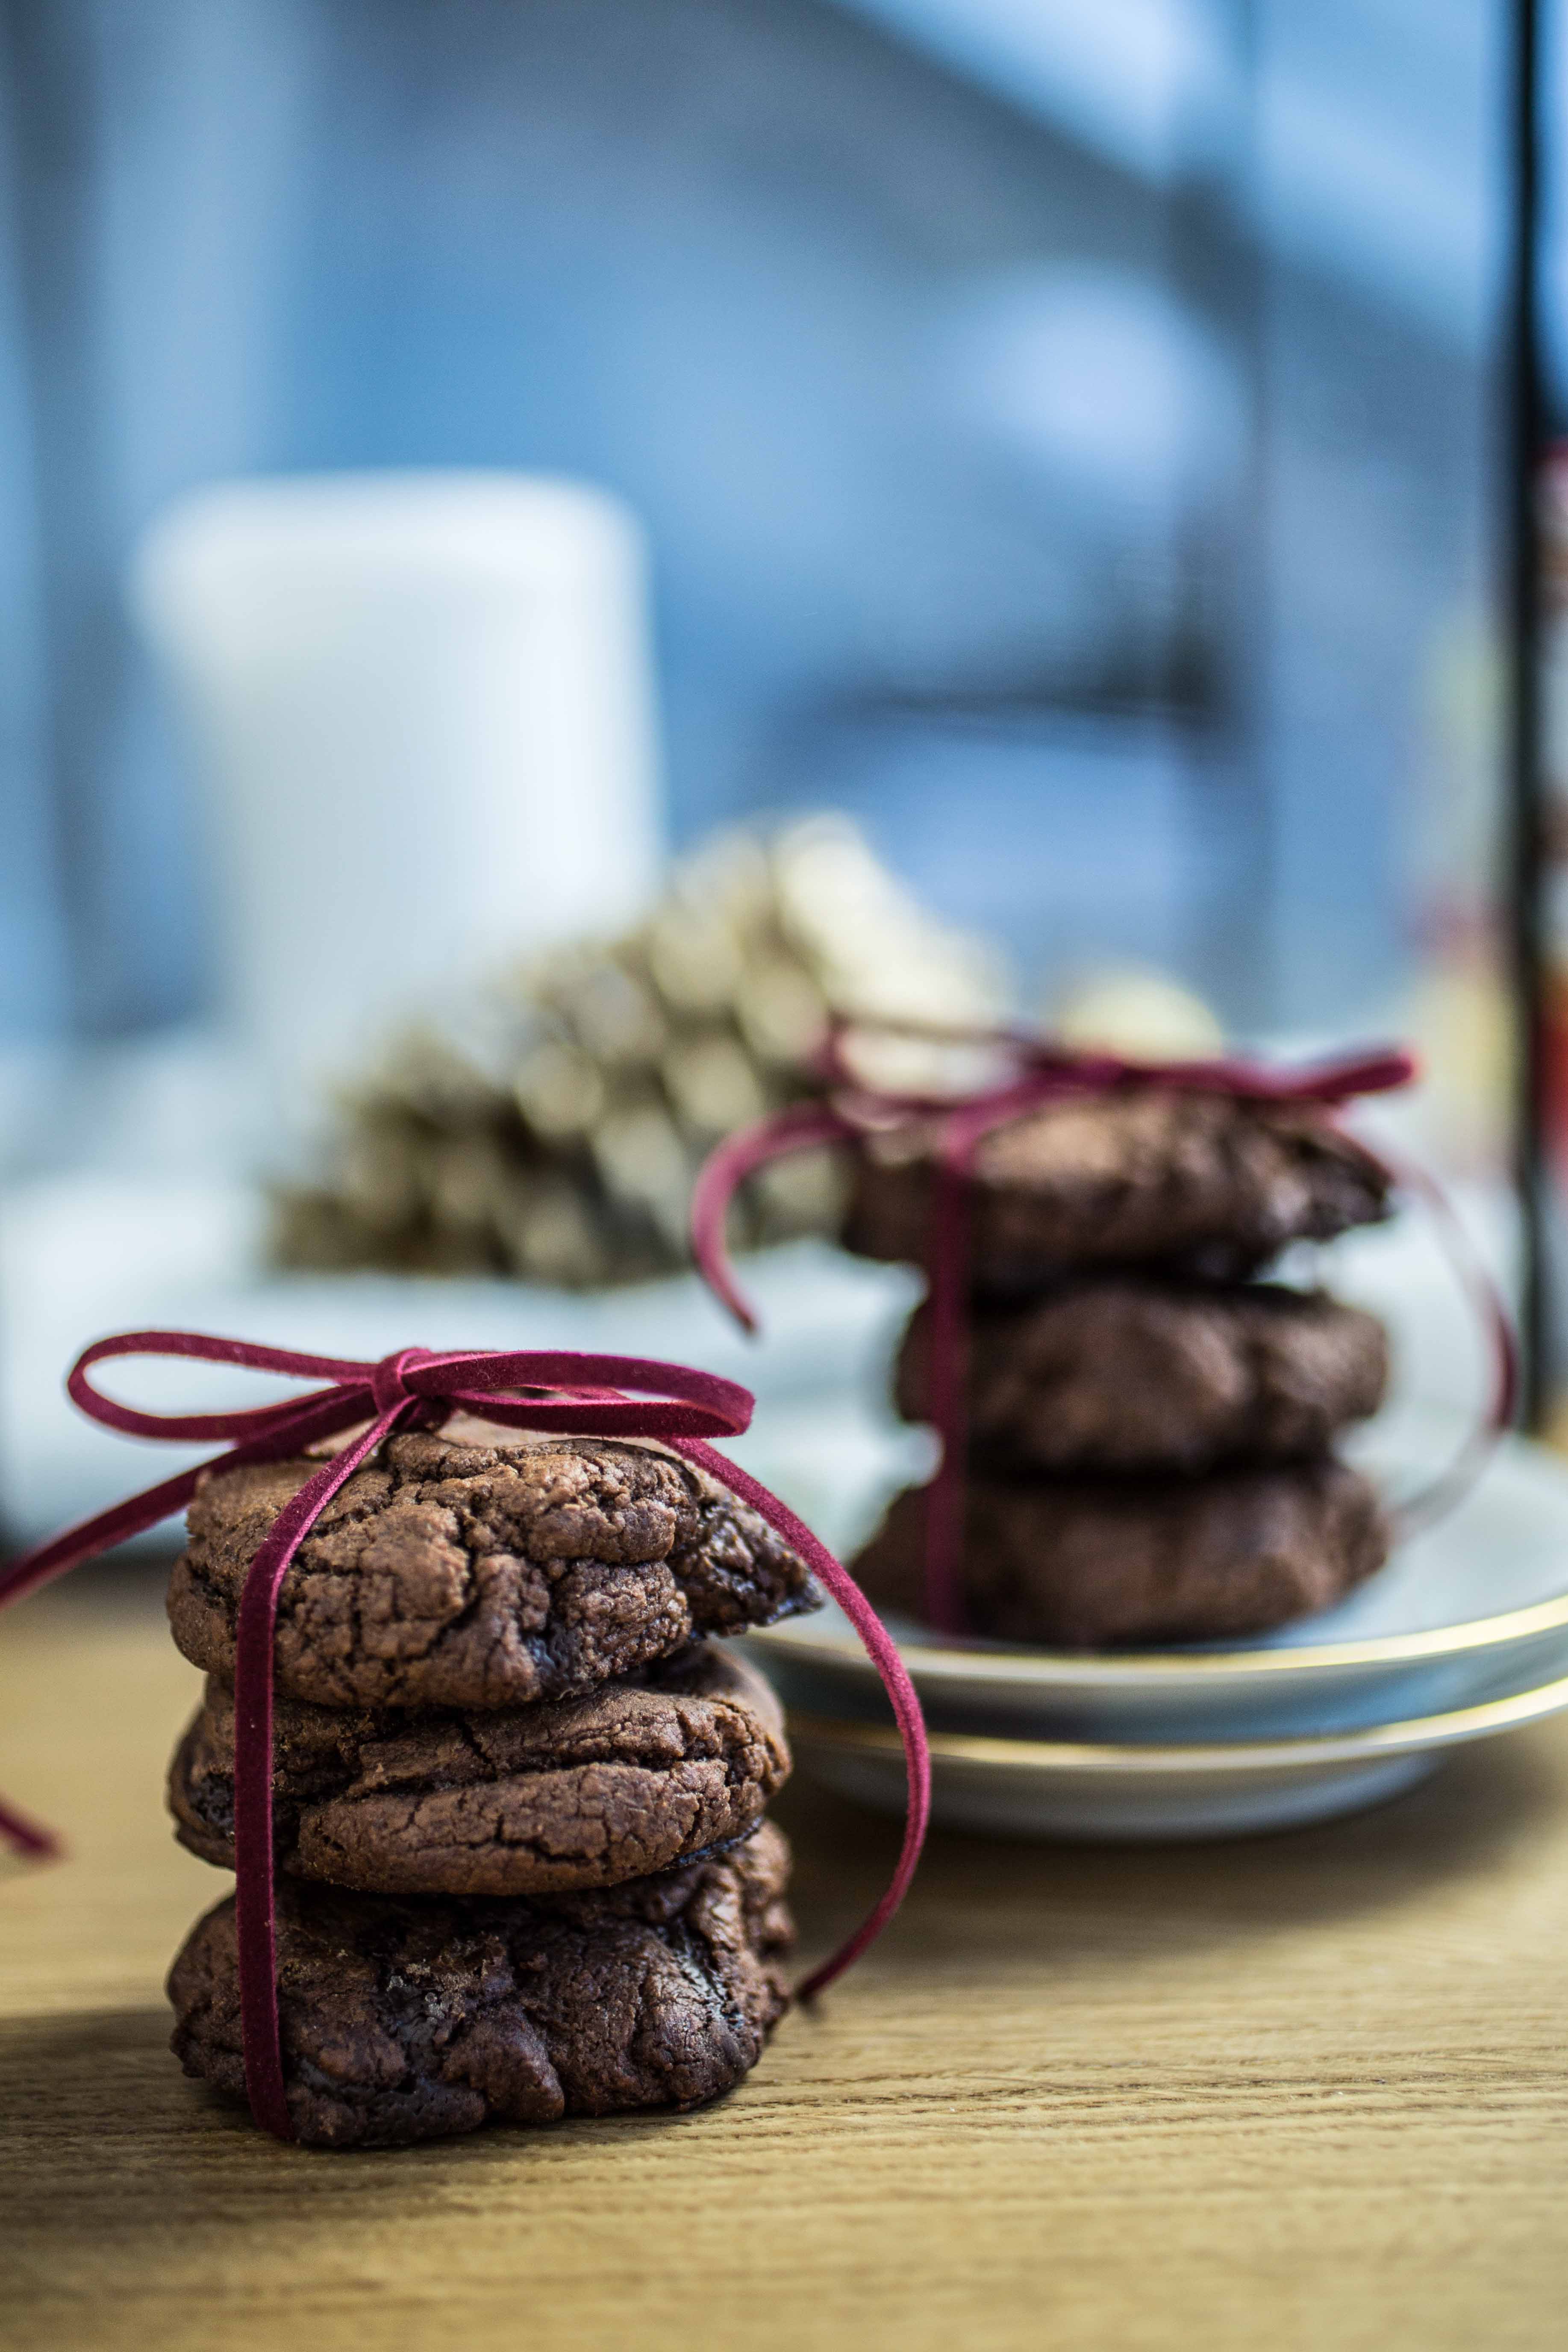 12 Days of Christmas: Chocolate Chip Cookies